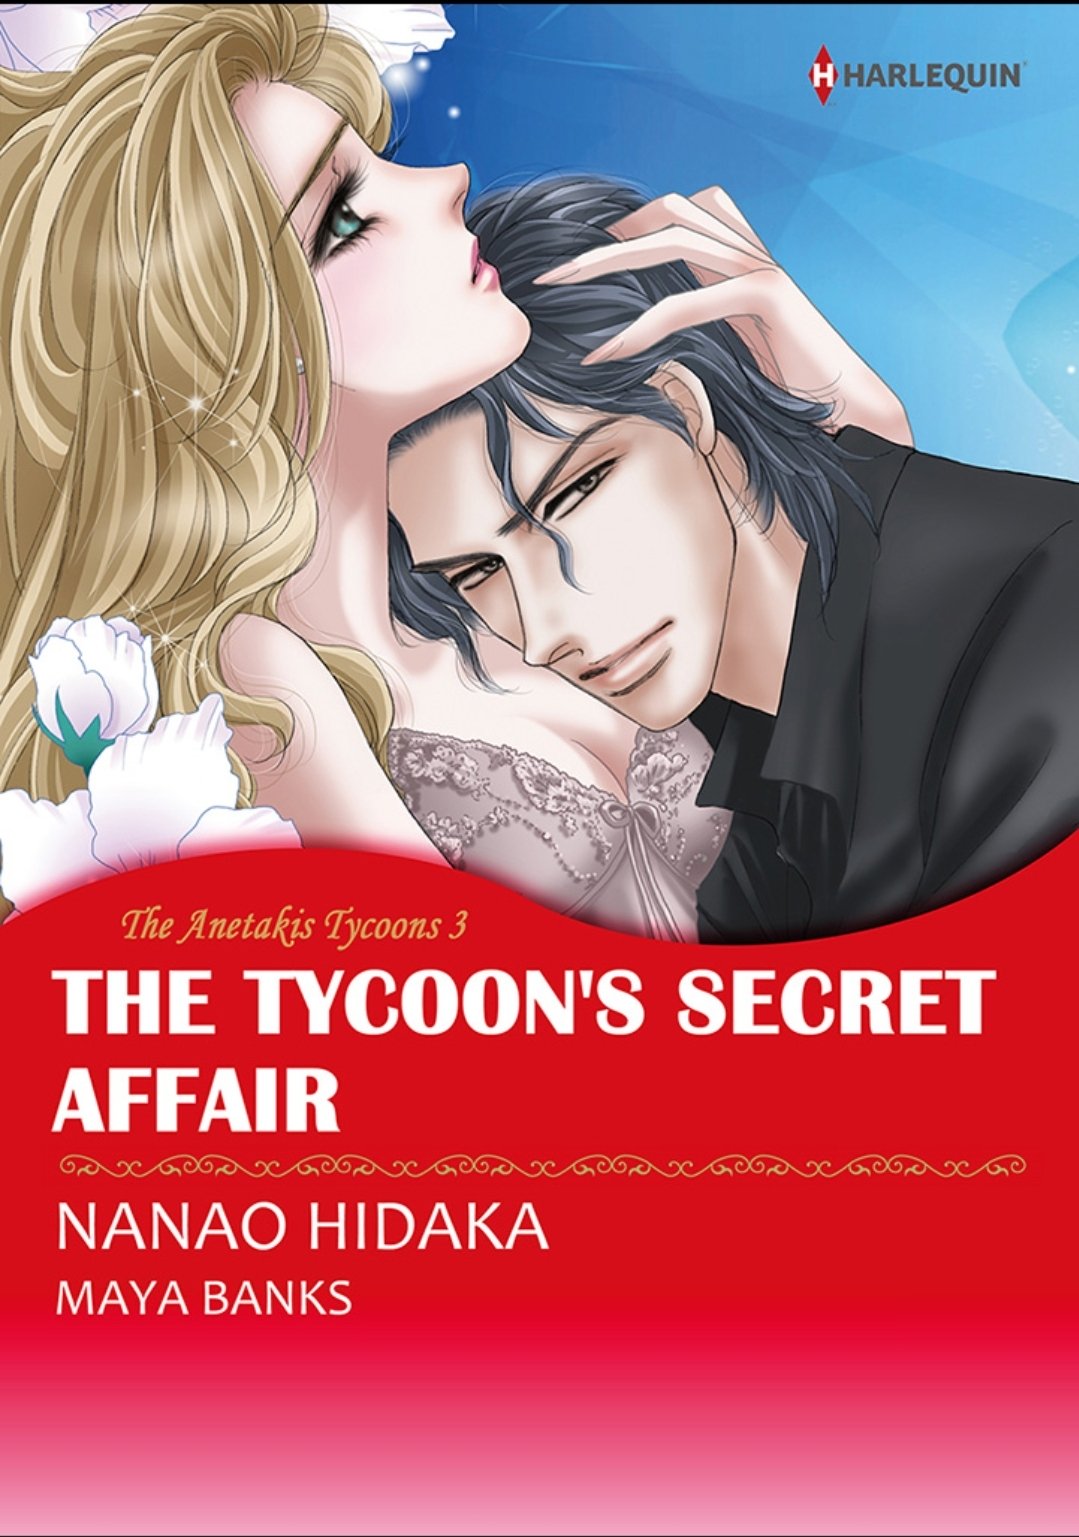 The Tycoon's Secret Affair (The Anetakis Tycoons Book 3) Ch.1